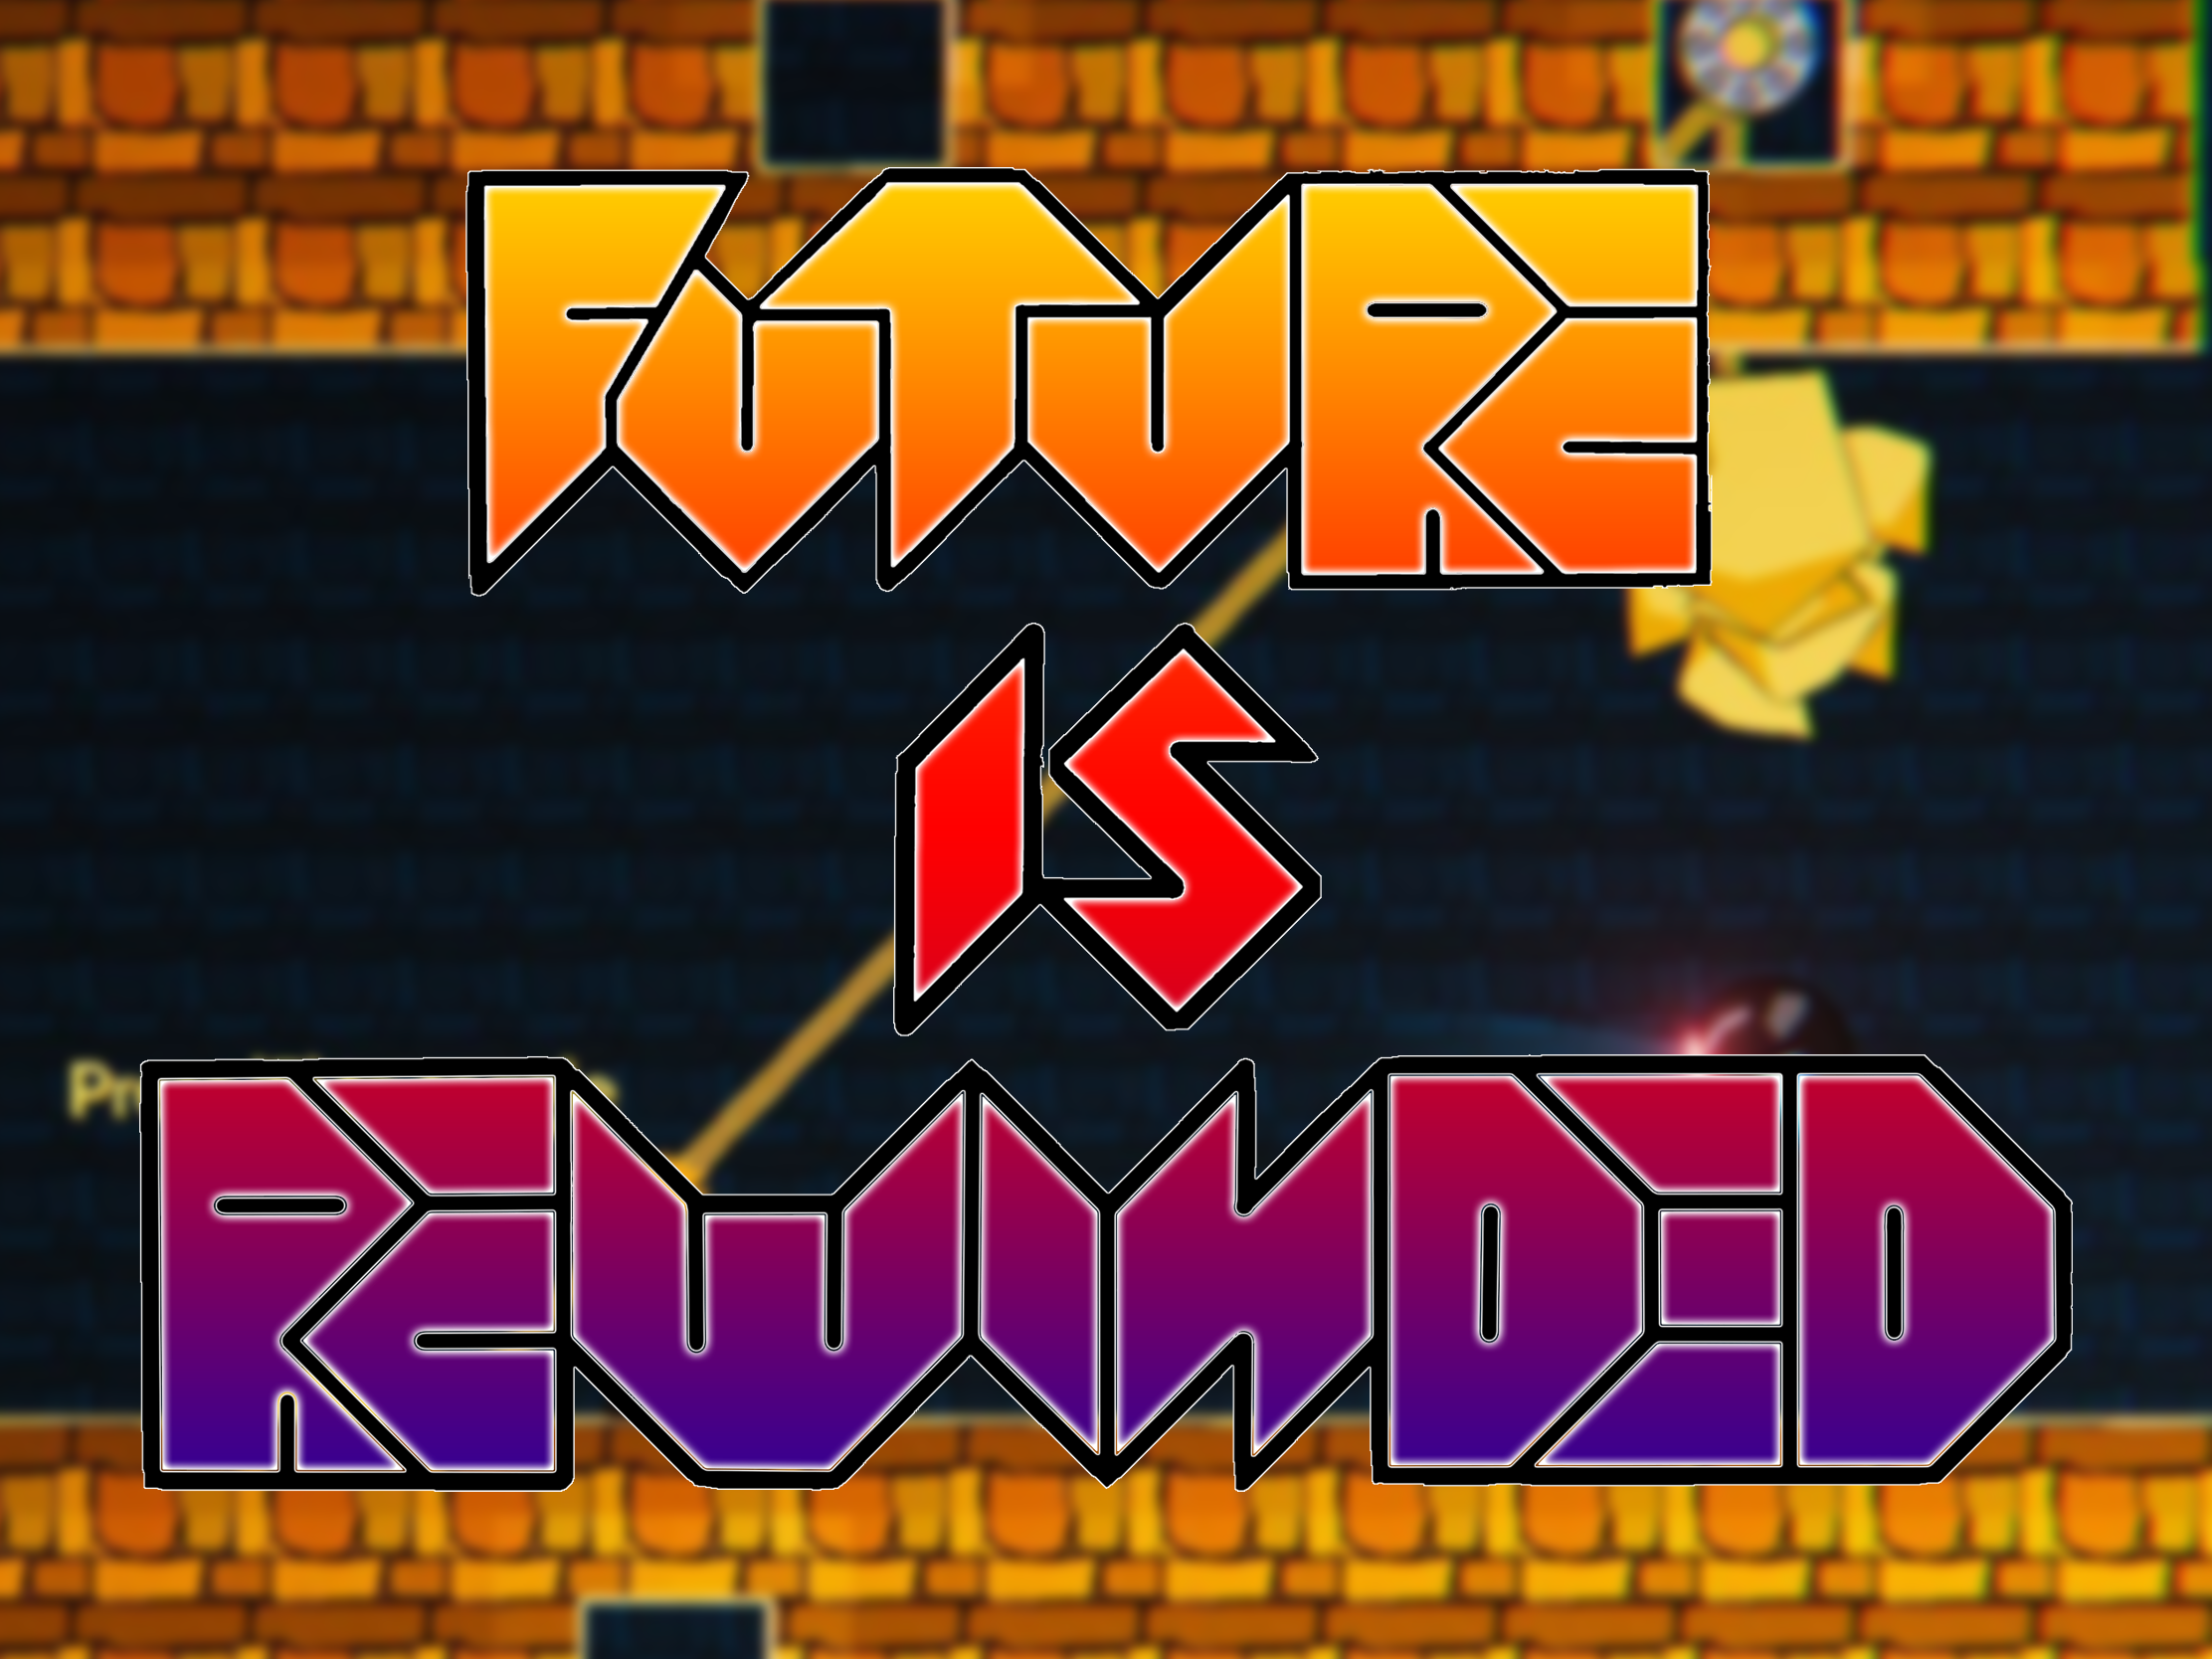 New game - Future Is Rewinded - full screen news image